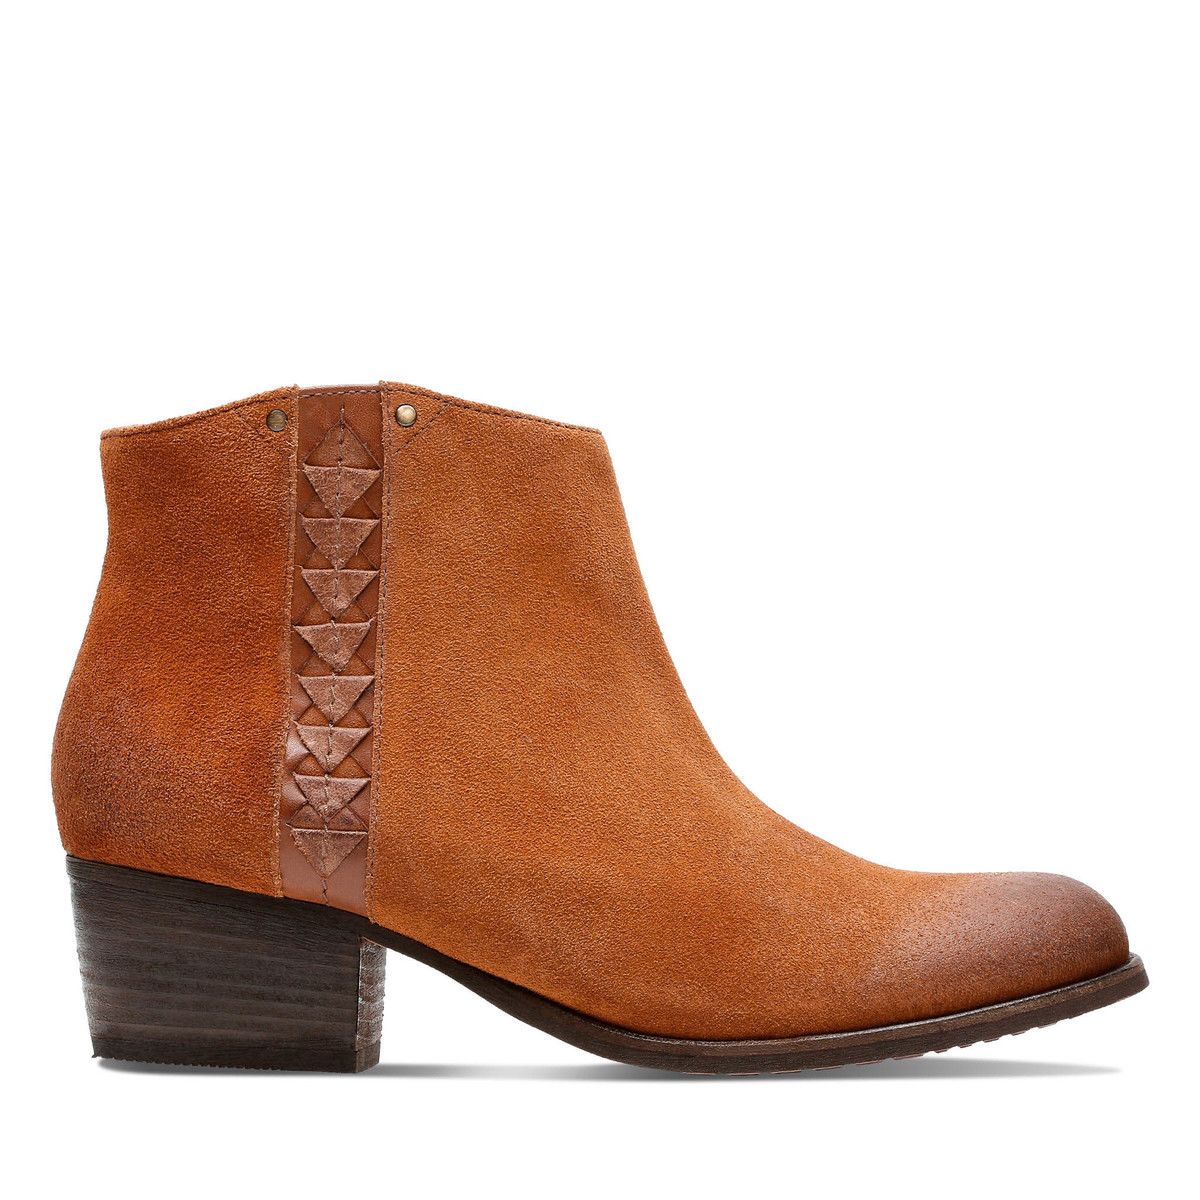 Clarks Maypearl Fawn D Fit Tan suede 